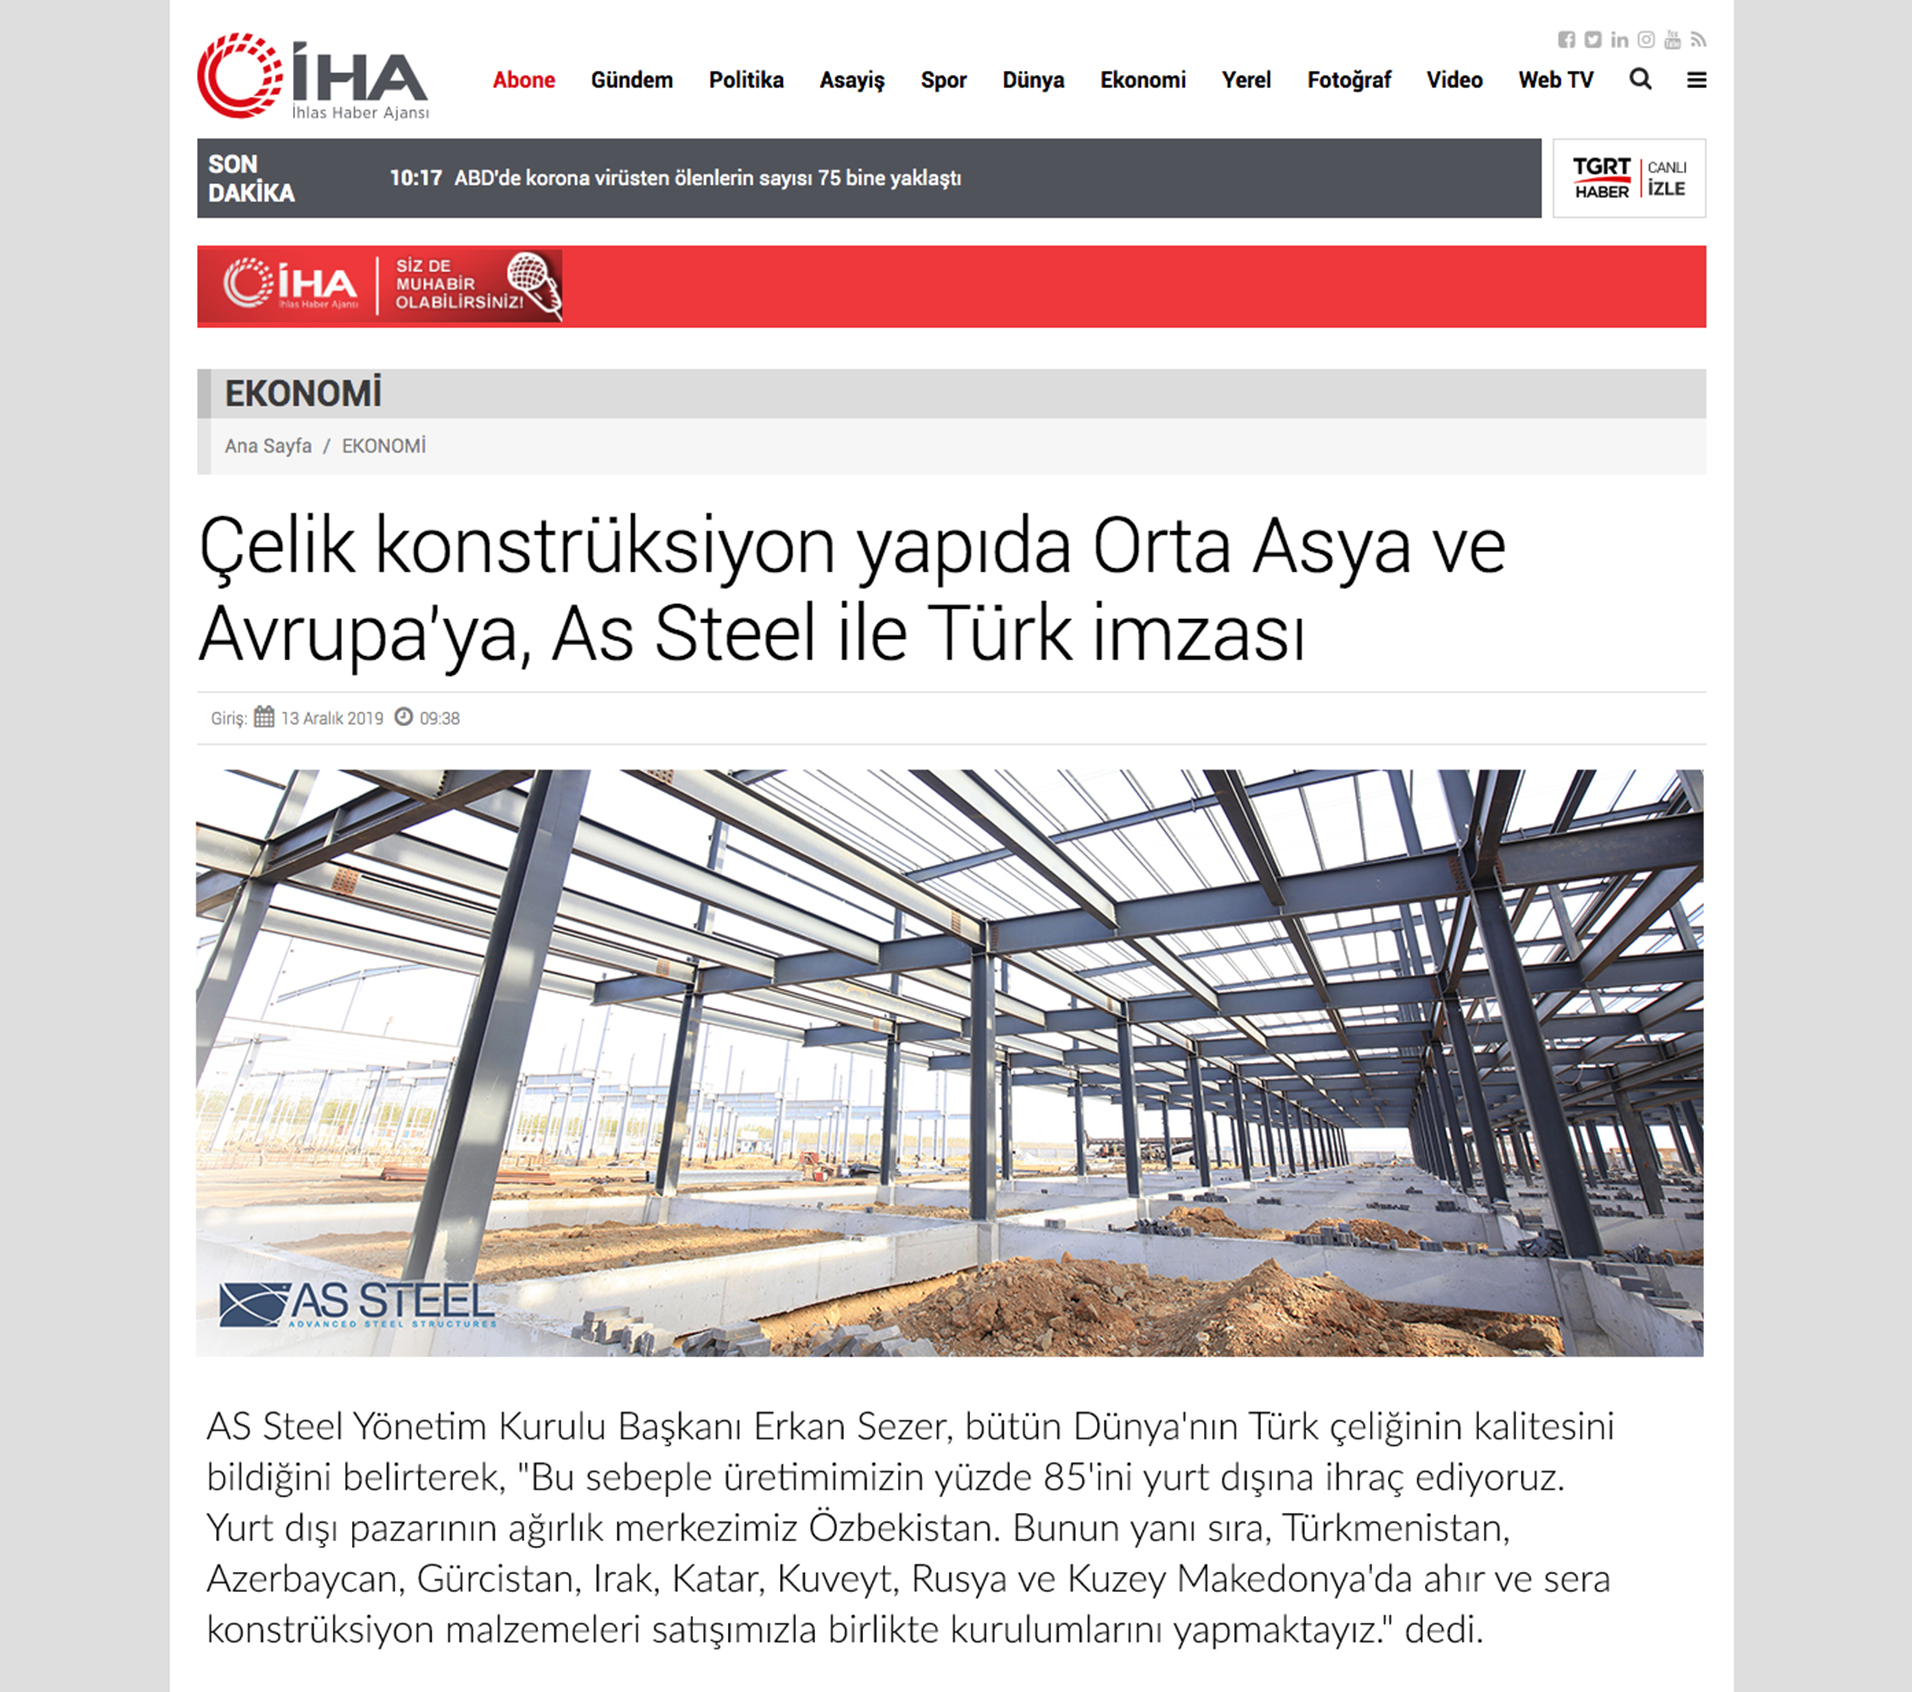 Turkish Signature to Central Asia and Europe in Steel Construction Structures with As Steel